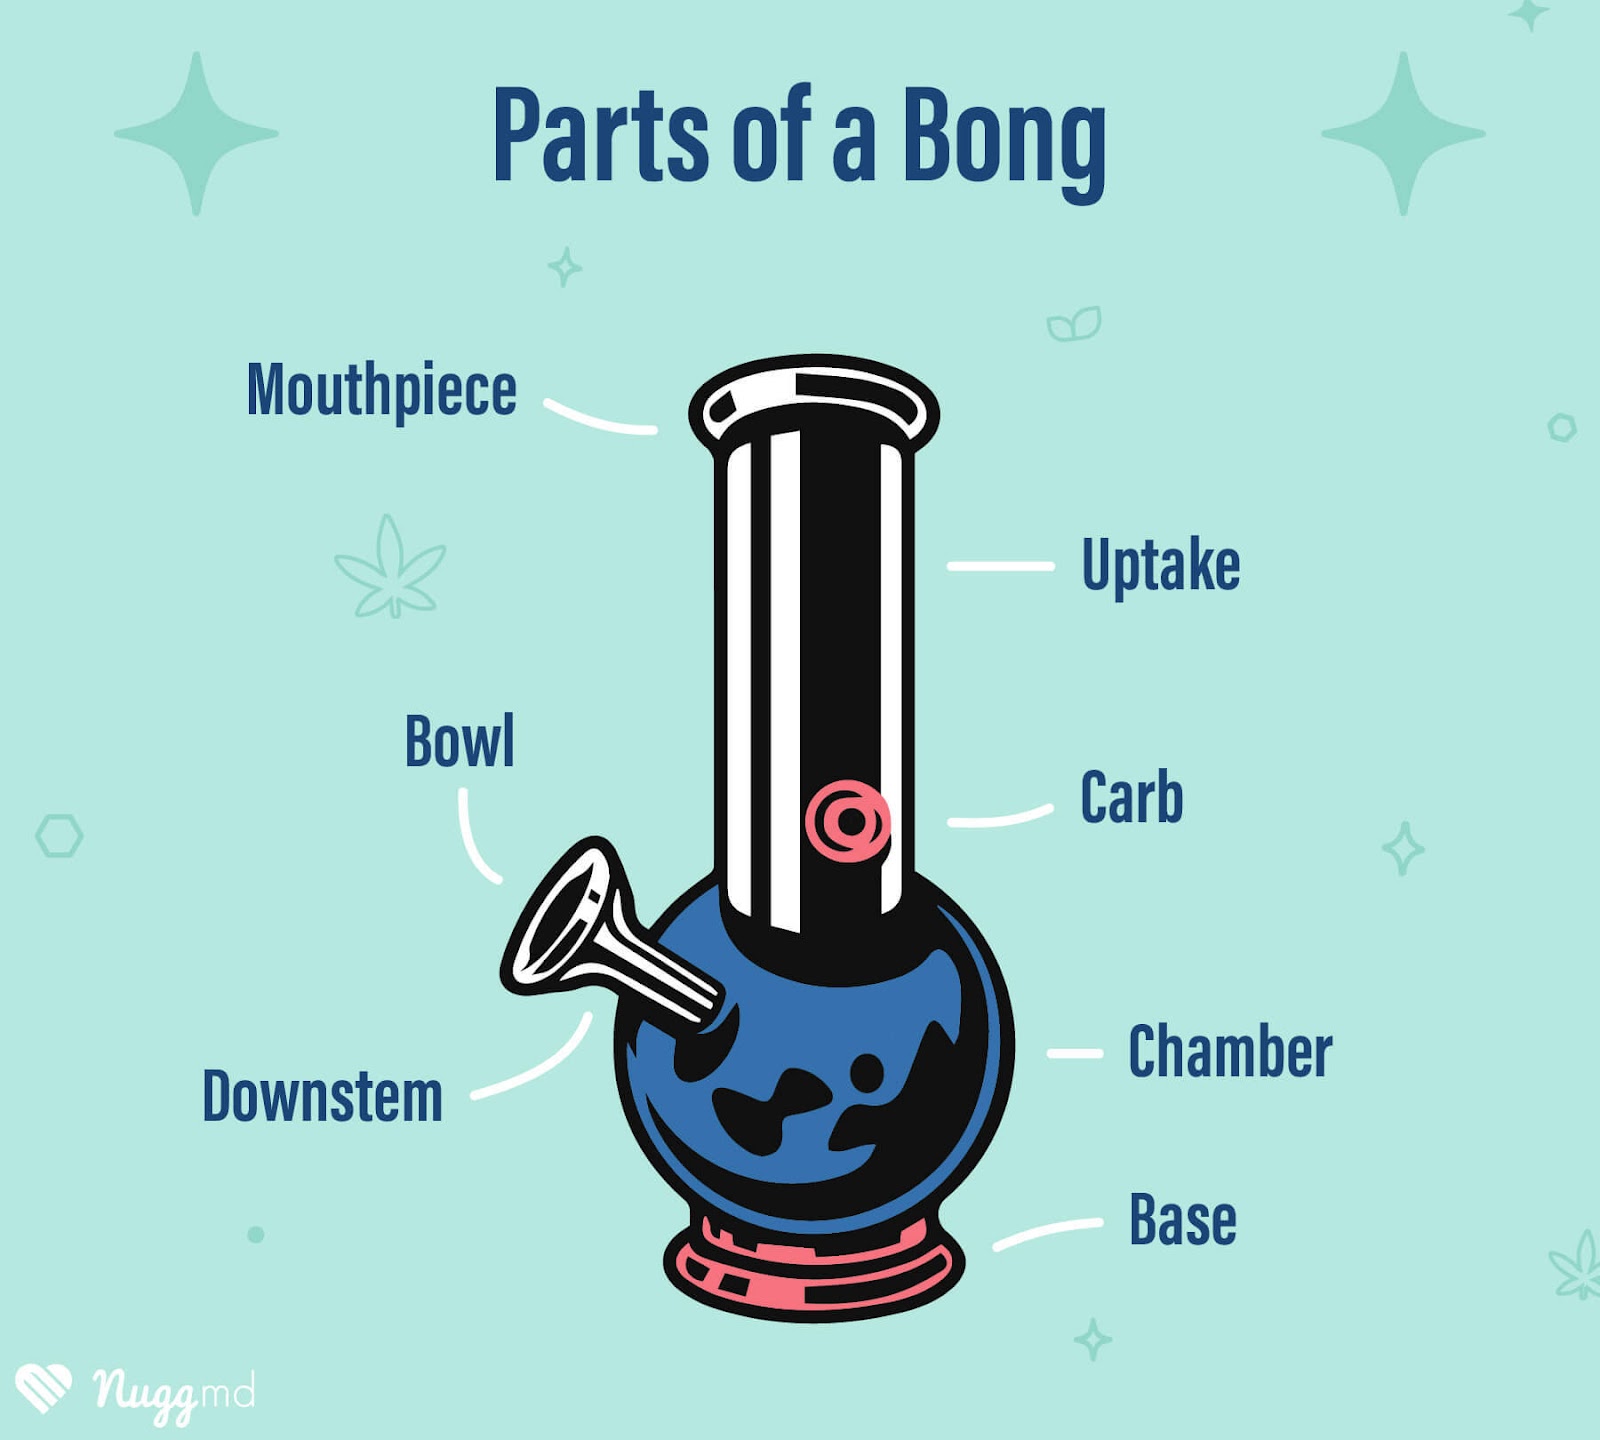 How to Use a Bong for the First Time